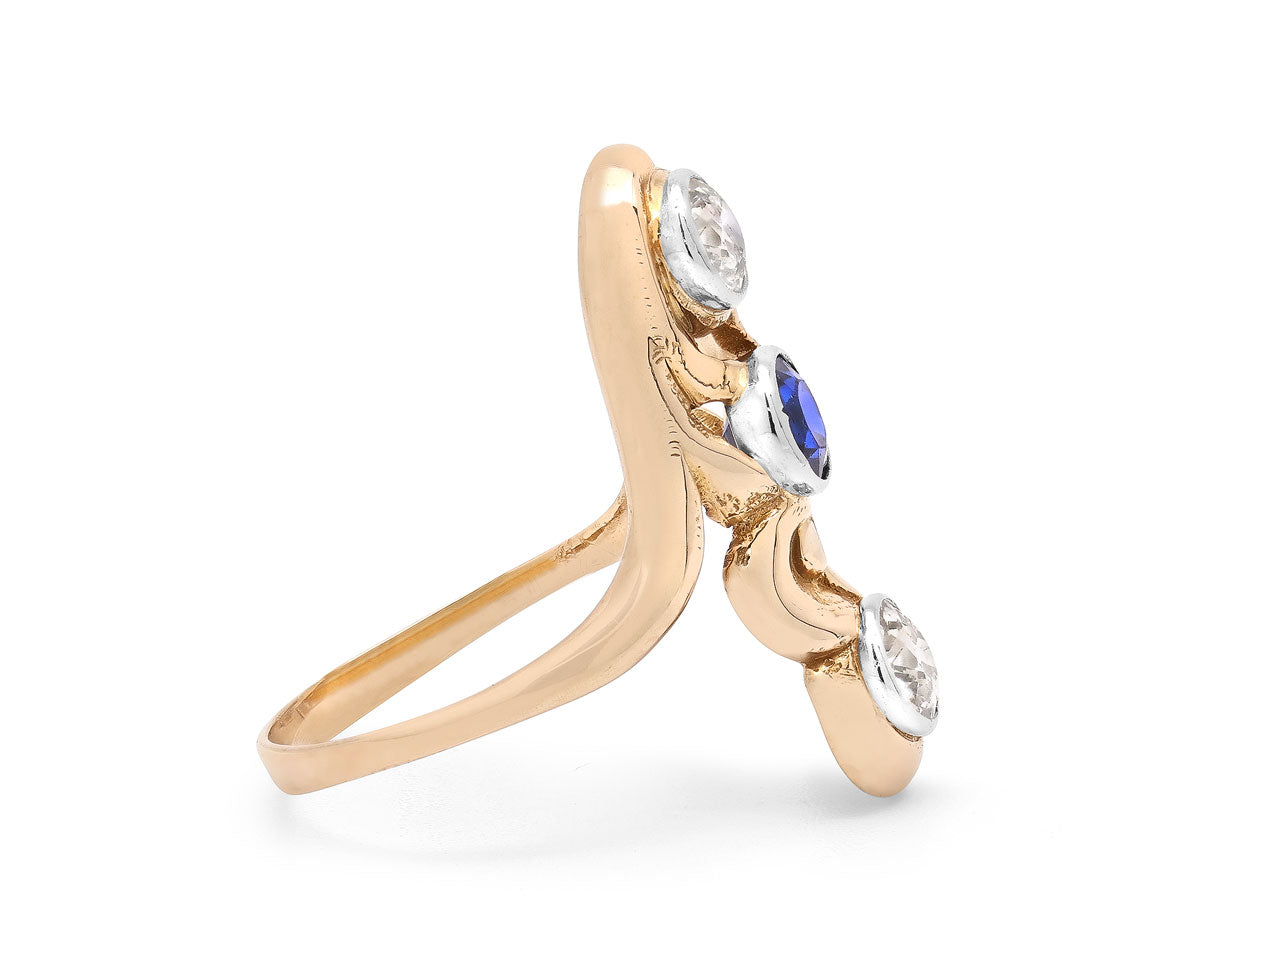 Antique Art Nouveau Sapphire and Diamond Ring in 14K Gold